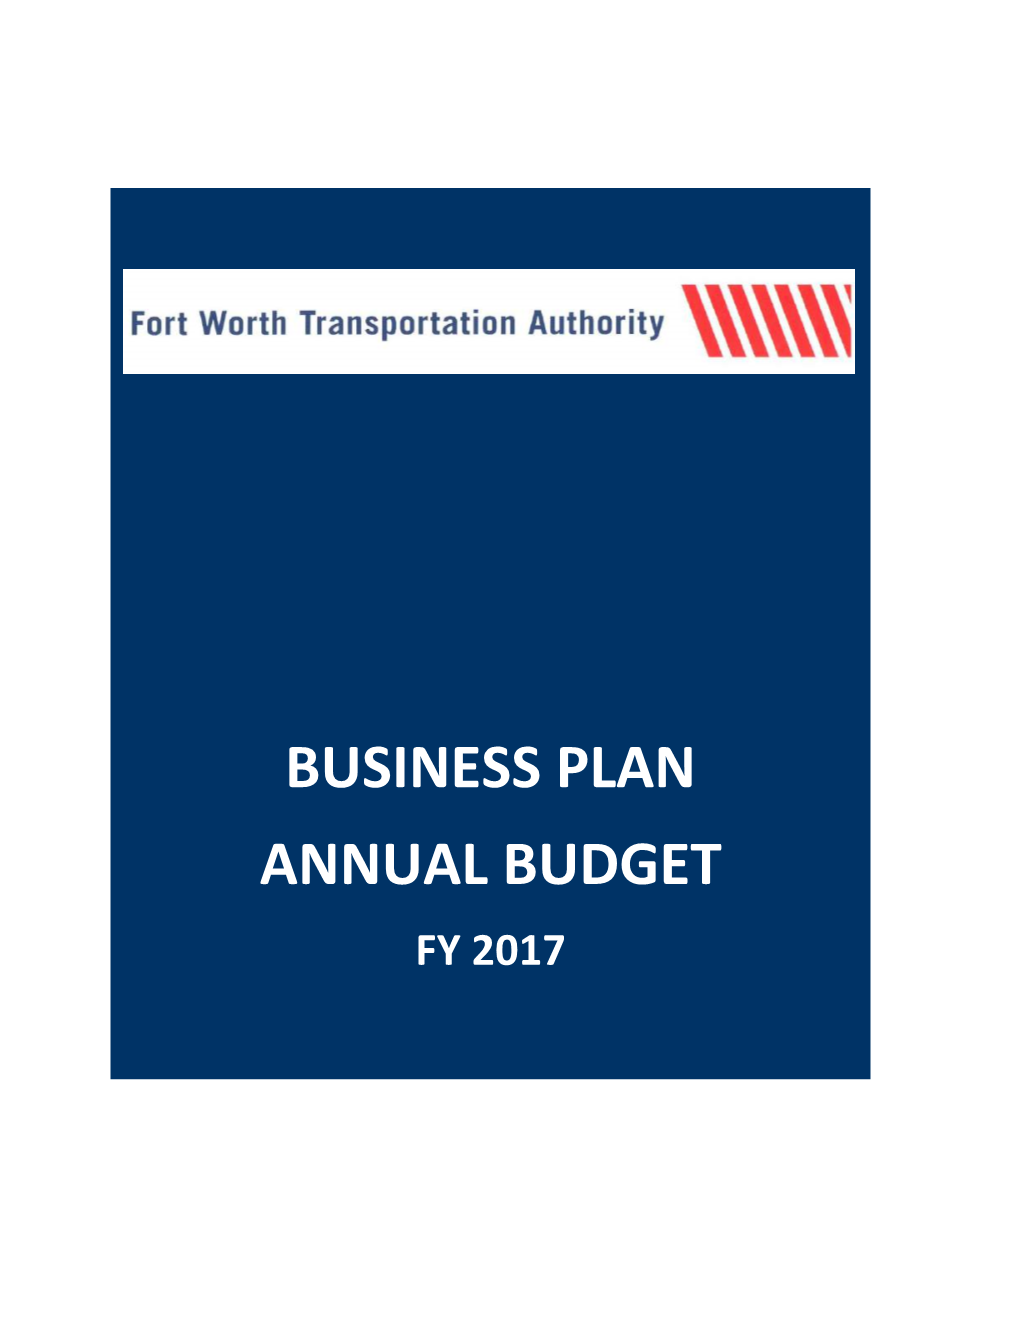 Business Plan Annual Budget